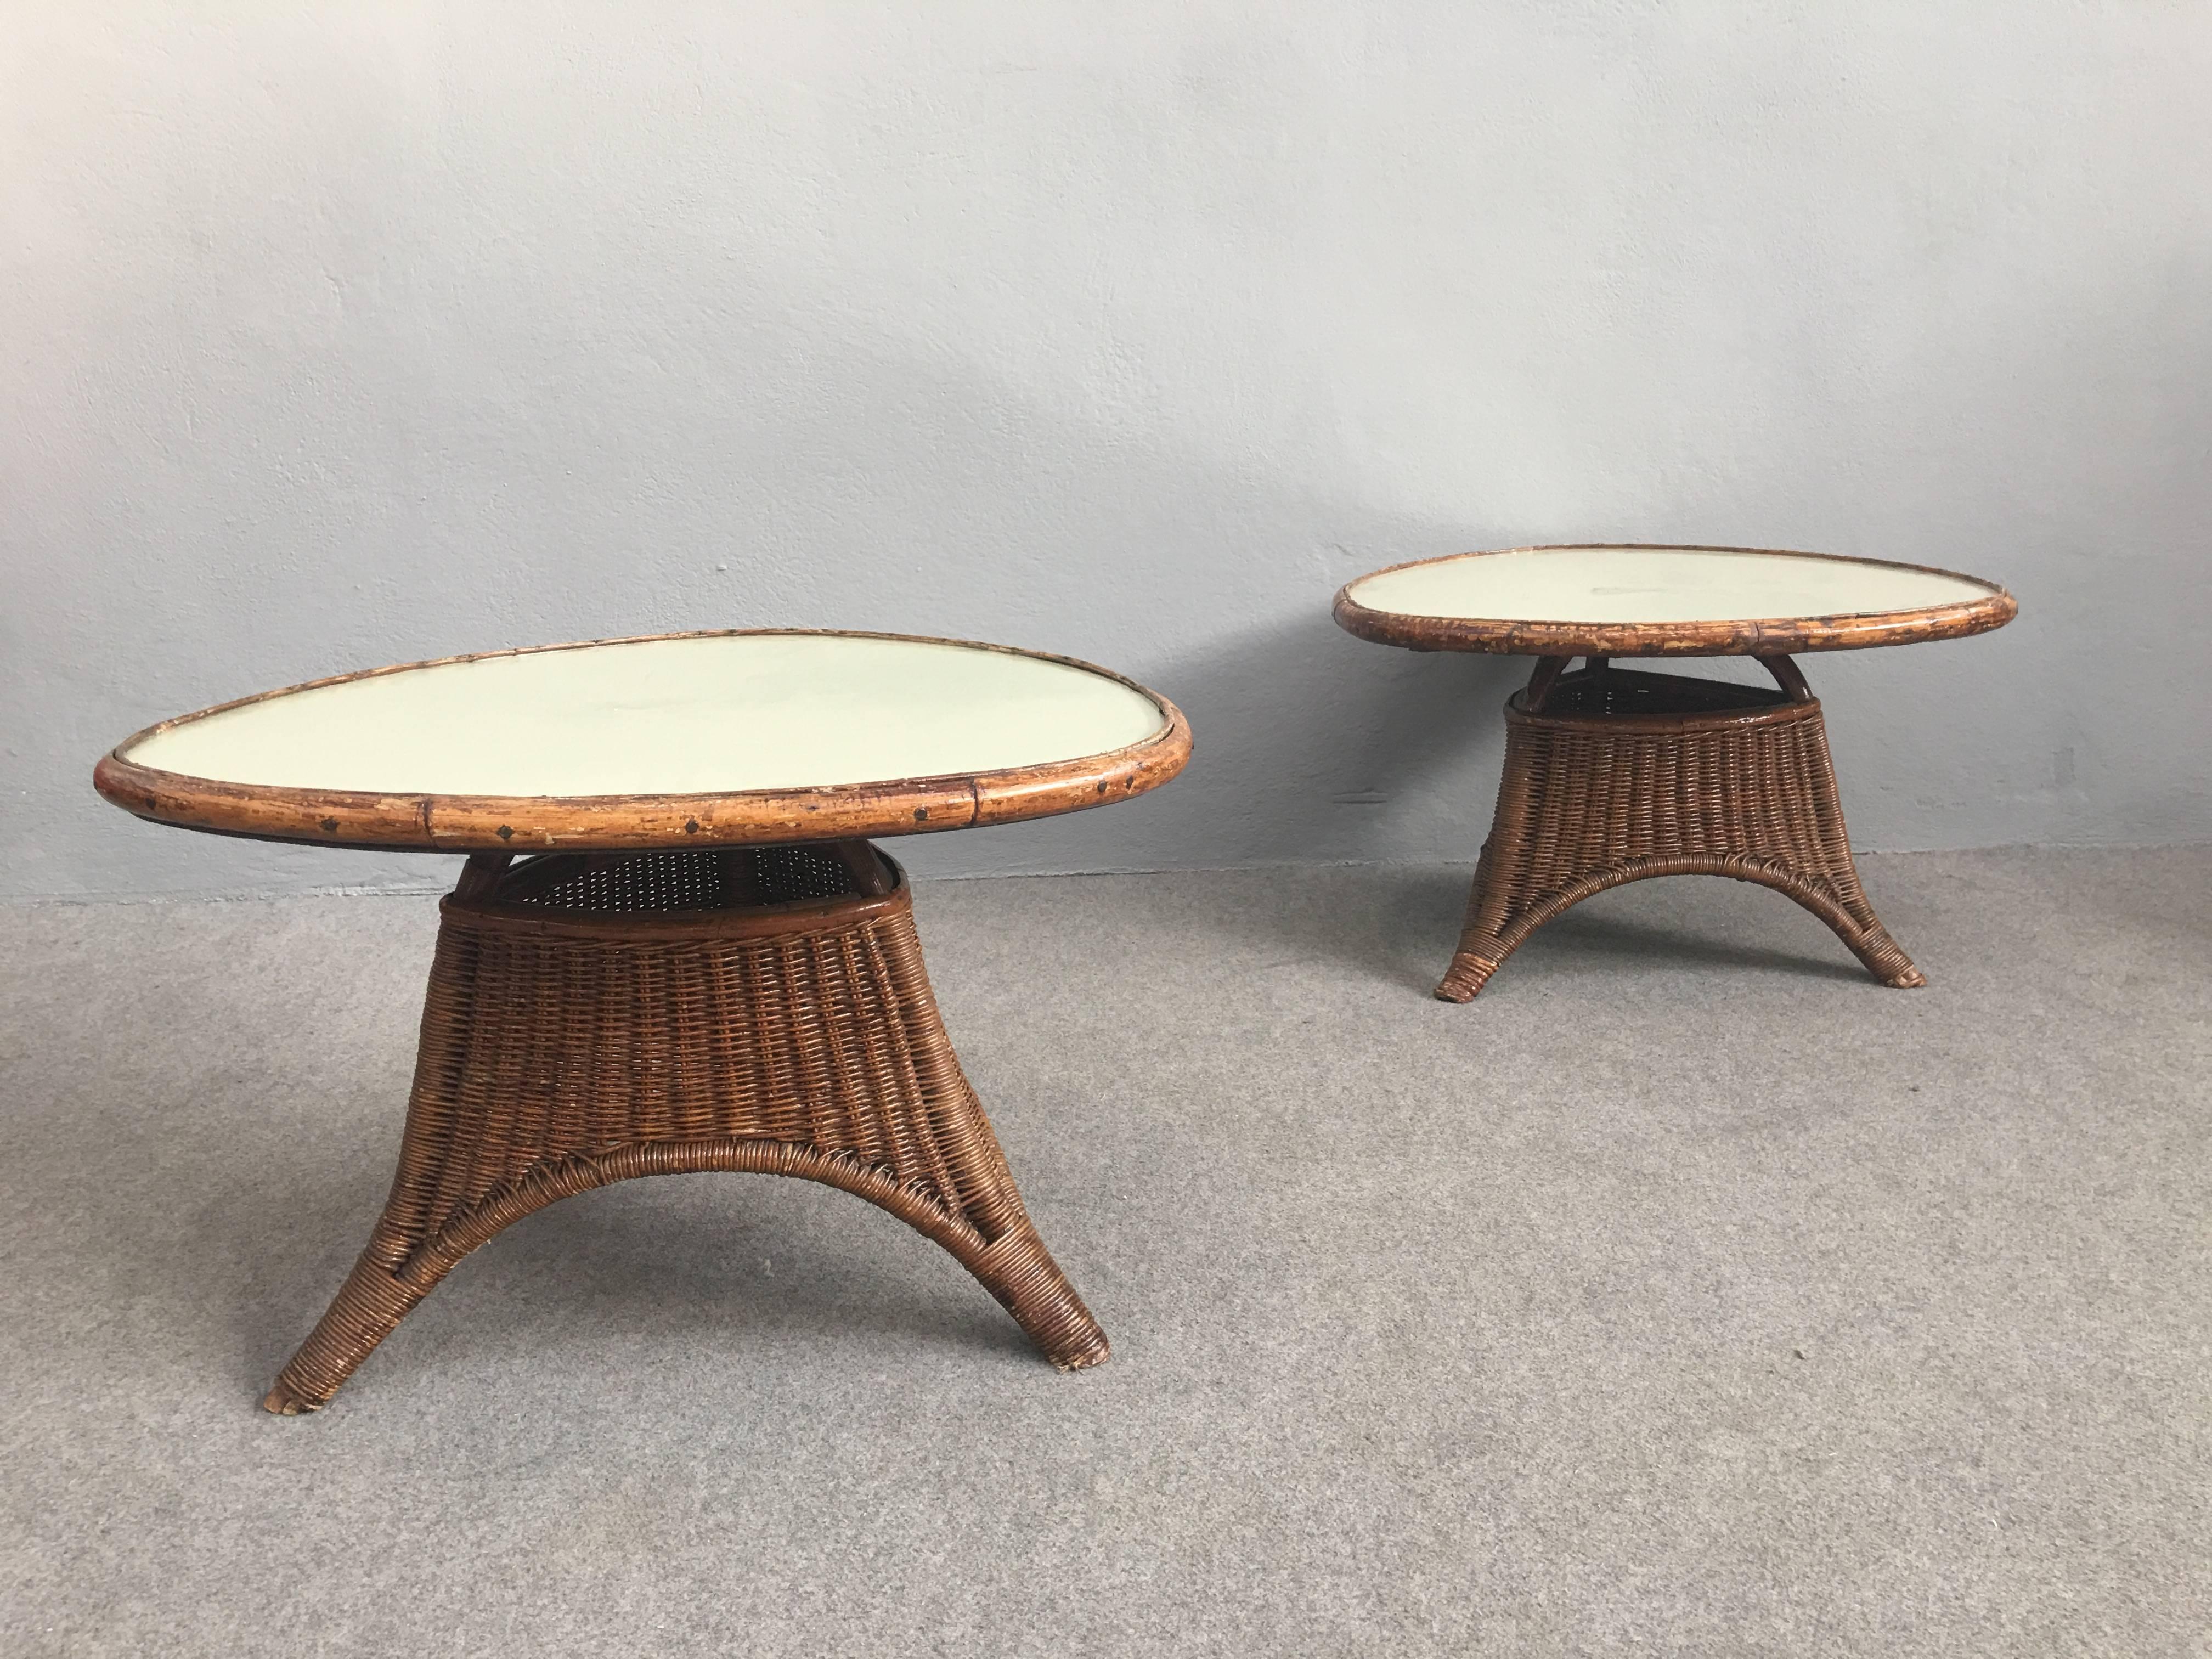 Glass top for these charming coffee tables. Shaped legs.